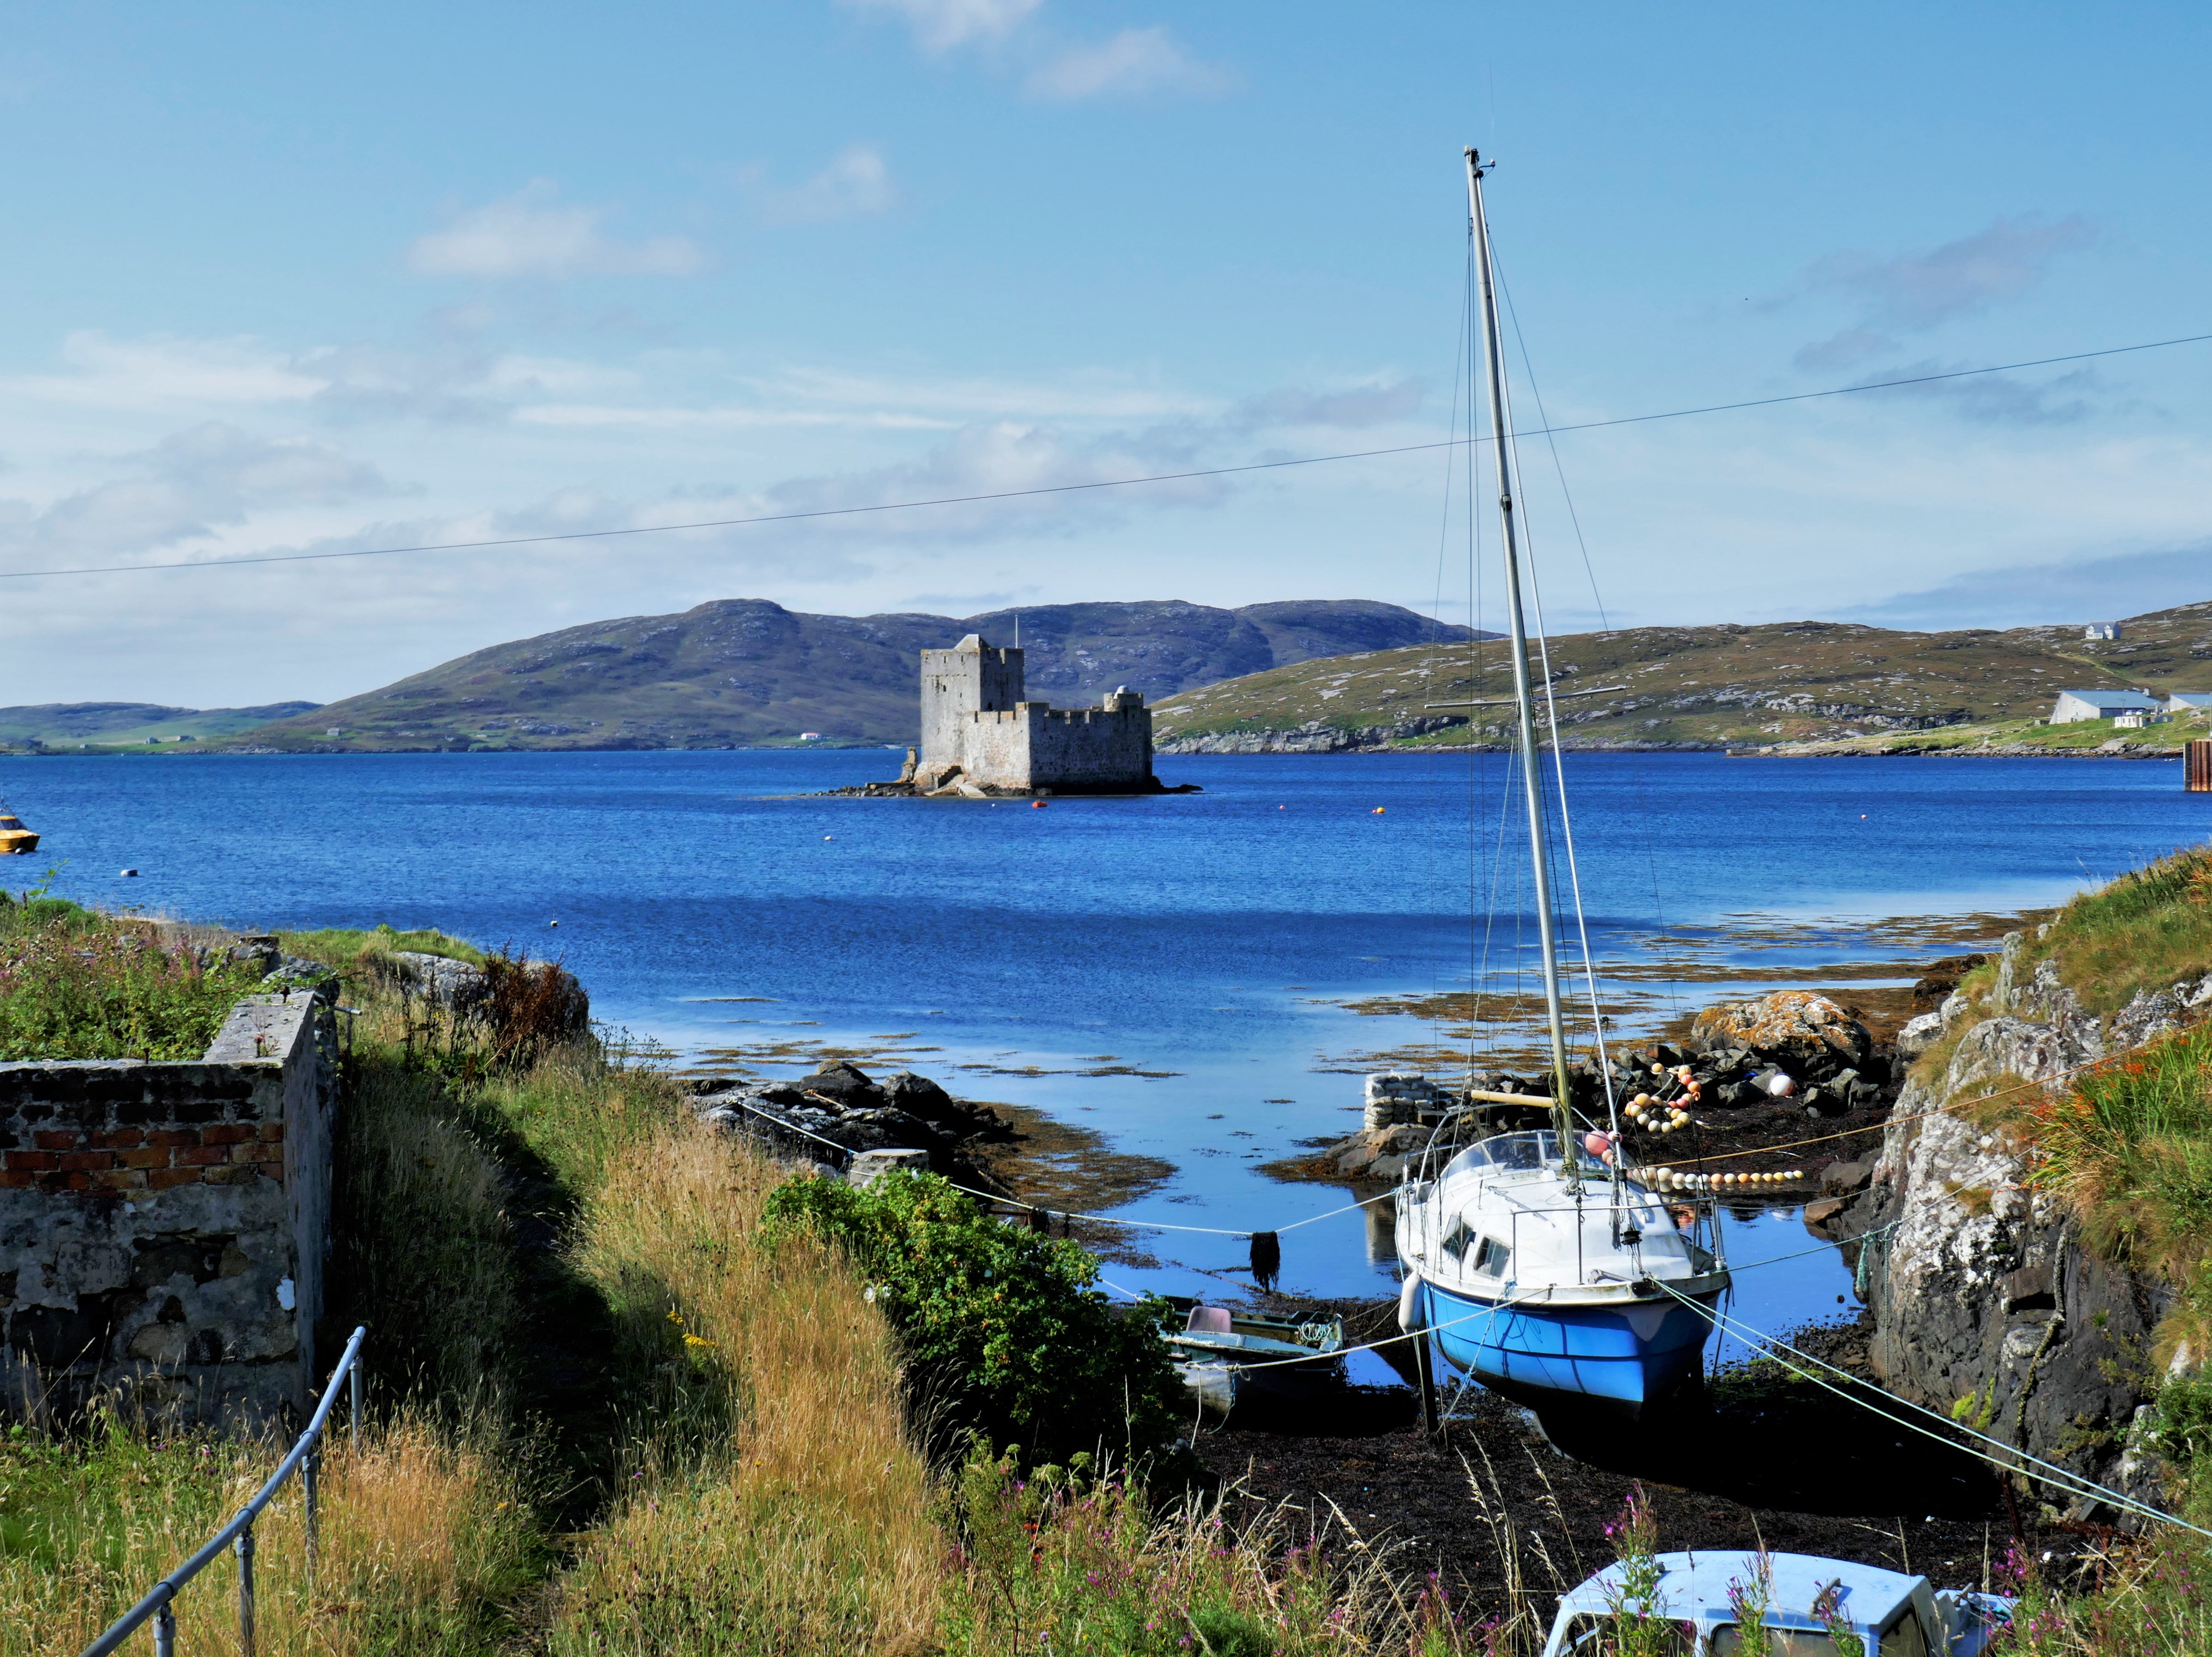 The Hebridean Way takes in some of the most picturesque landscapes in Scotland